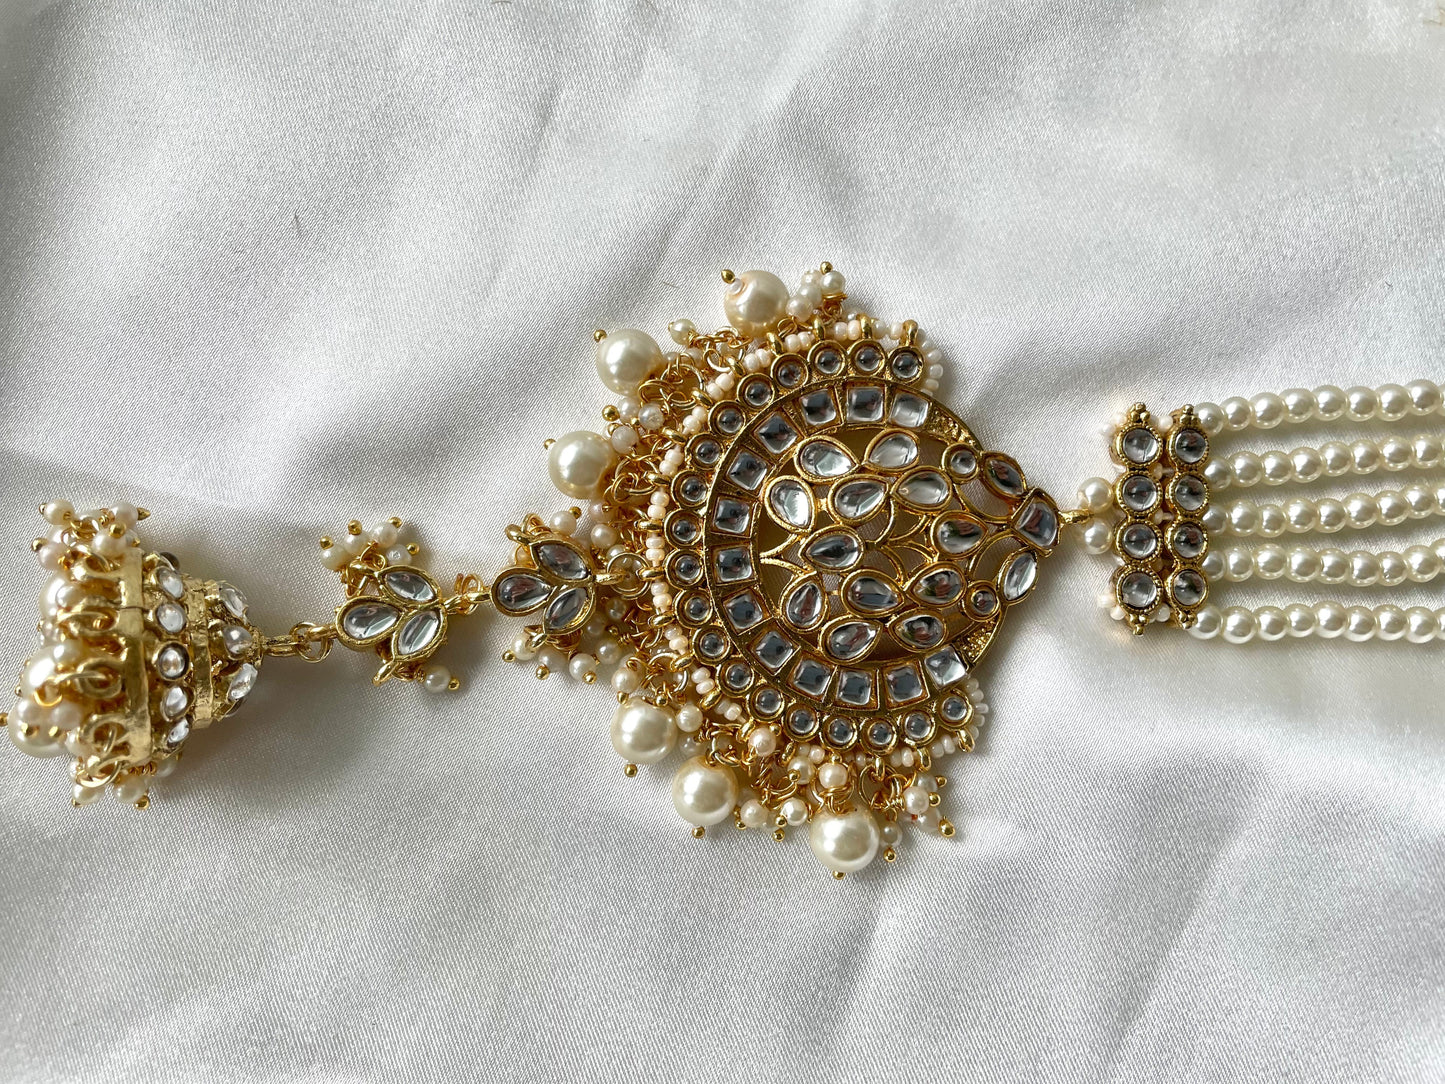 Gold and Pearl Braid Jewellery